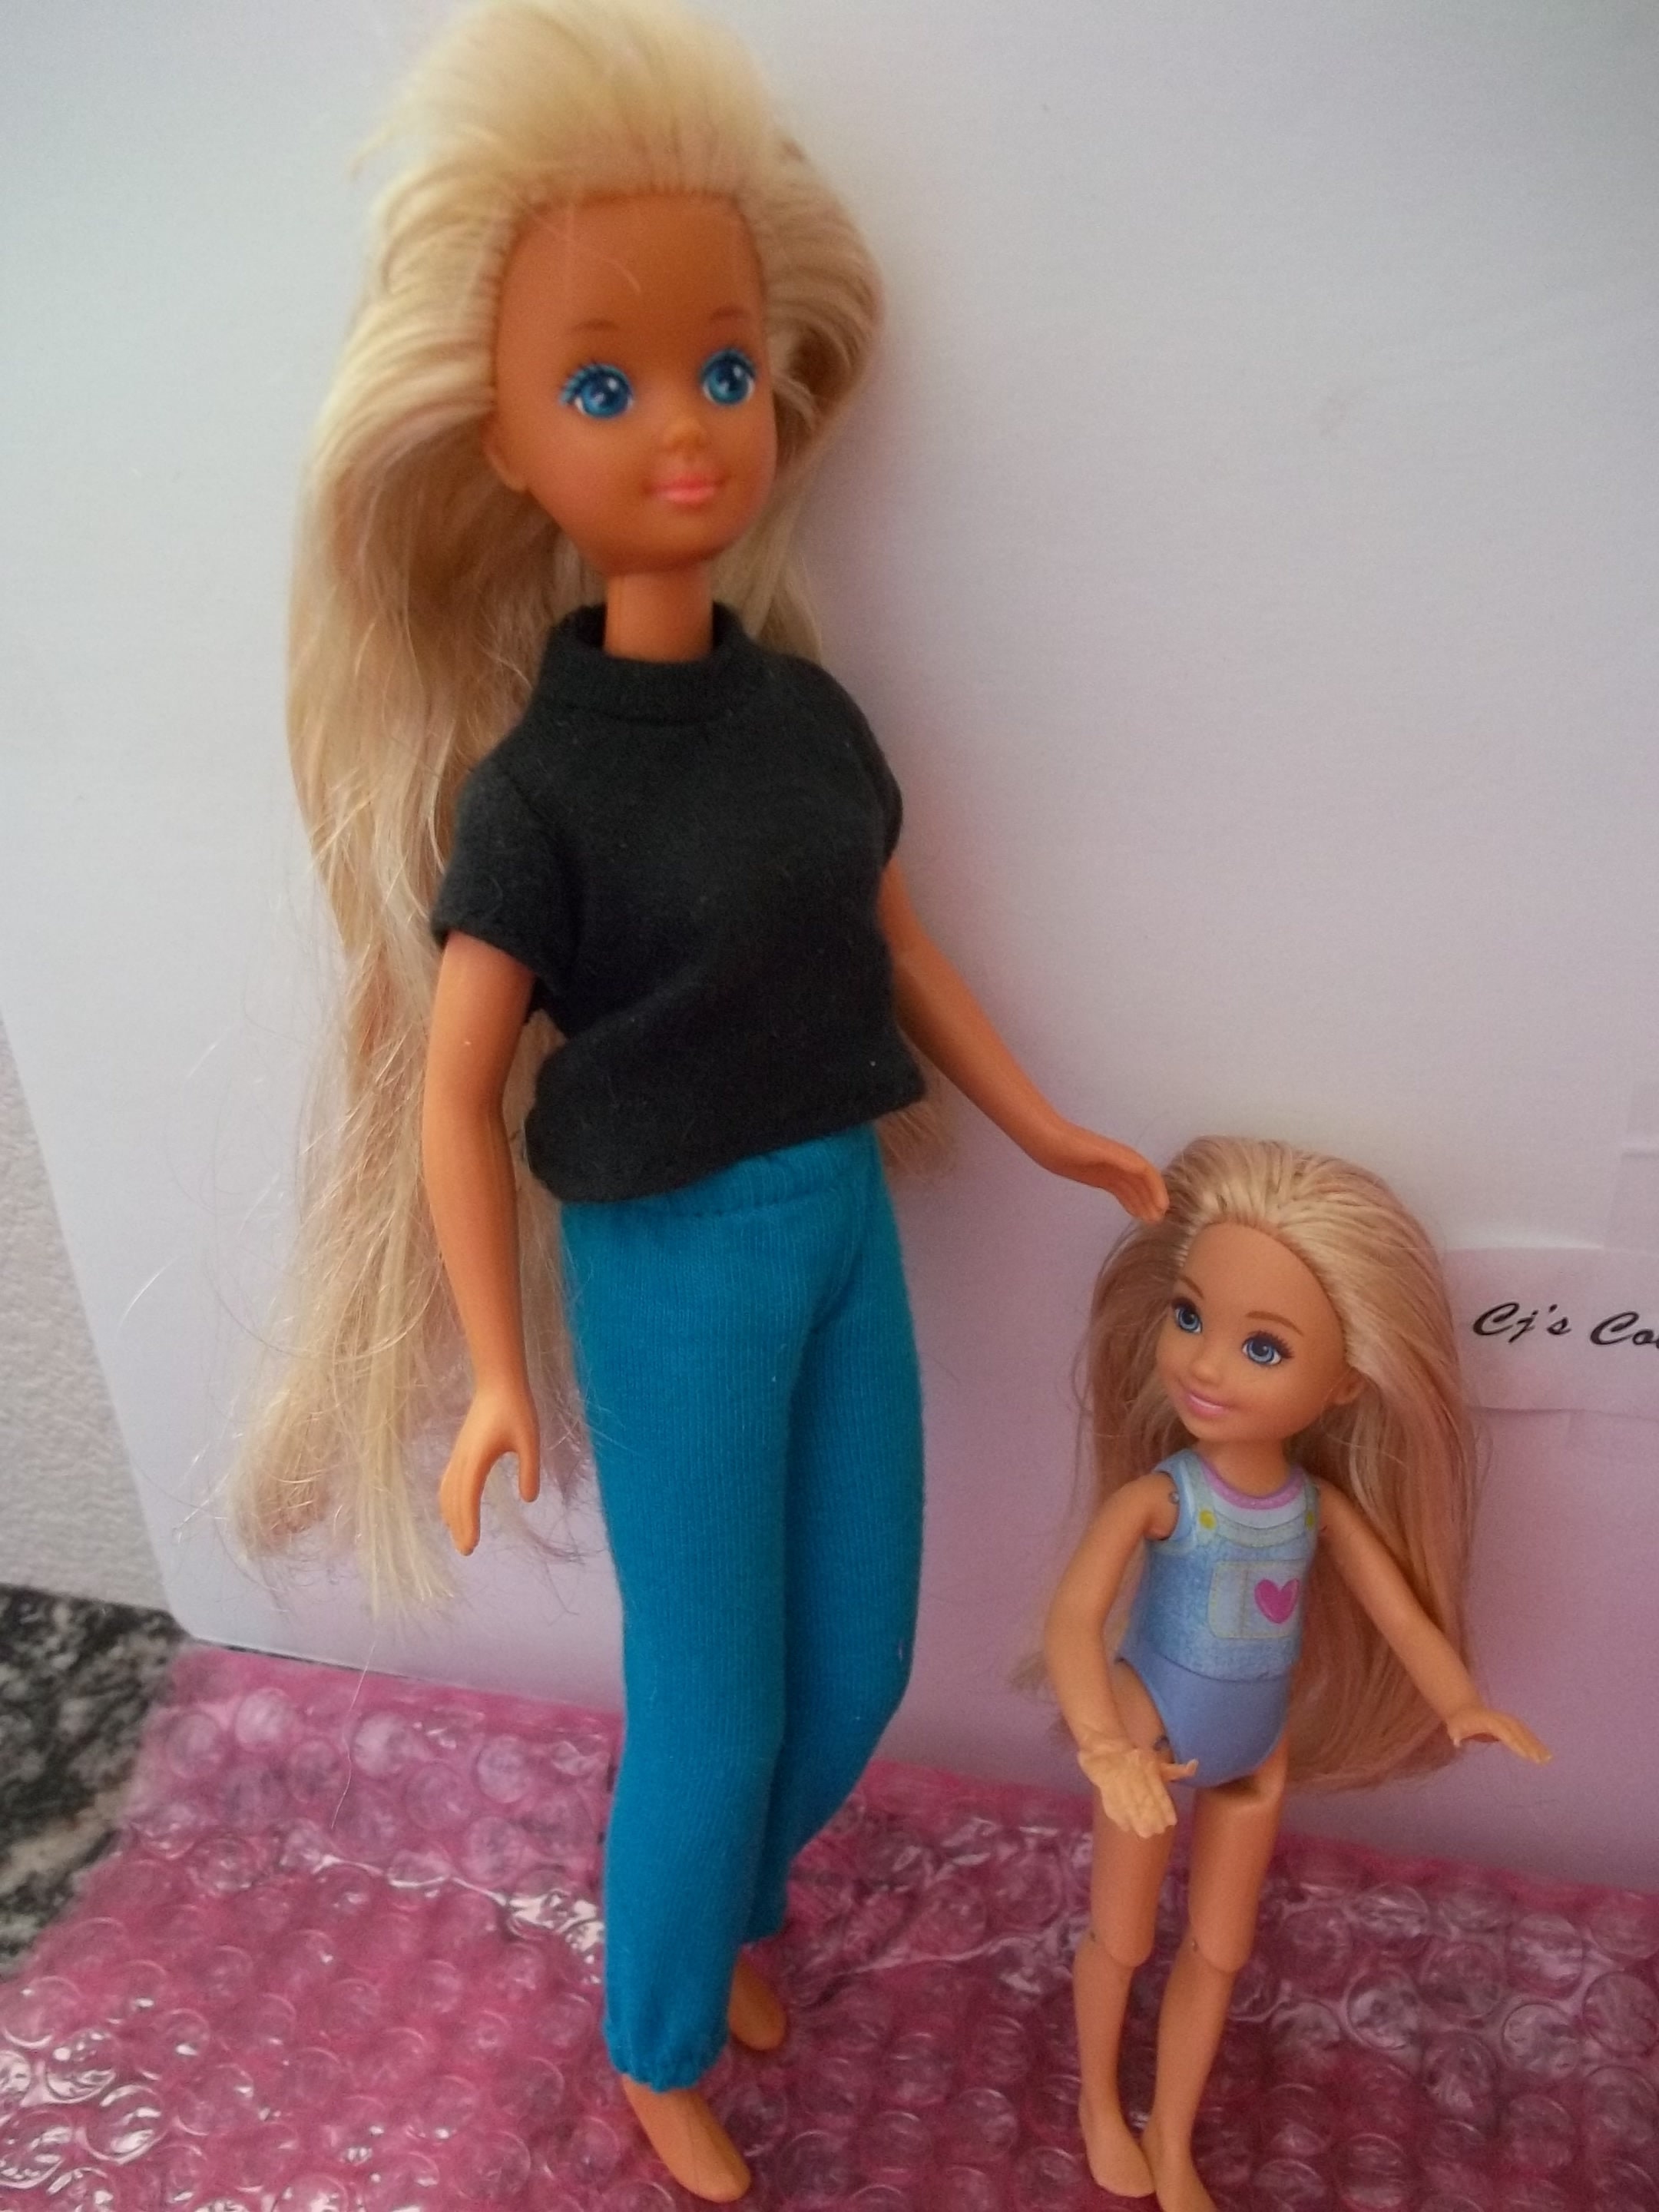 SALE Skipper Teen Fun Happy Meal Stacie Chelsey Barbie Sister Doll  Collection of 4 Dolls by Mattel Was 45.95 Now 29.95 